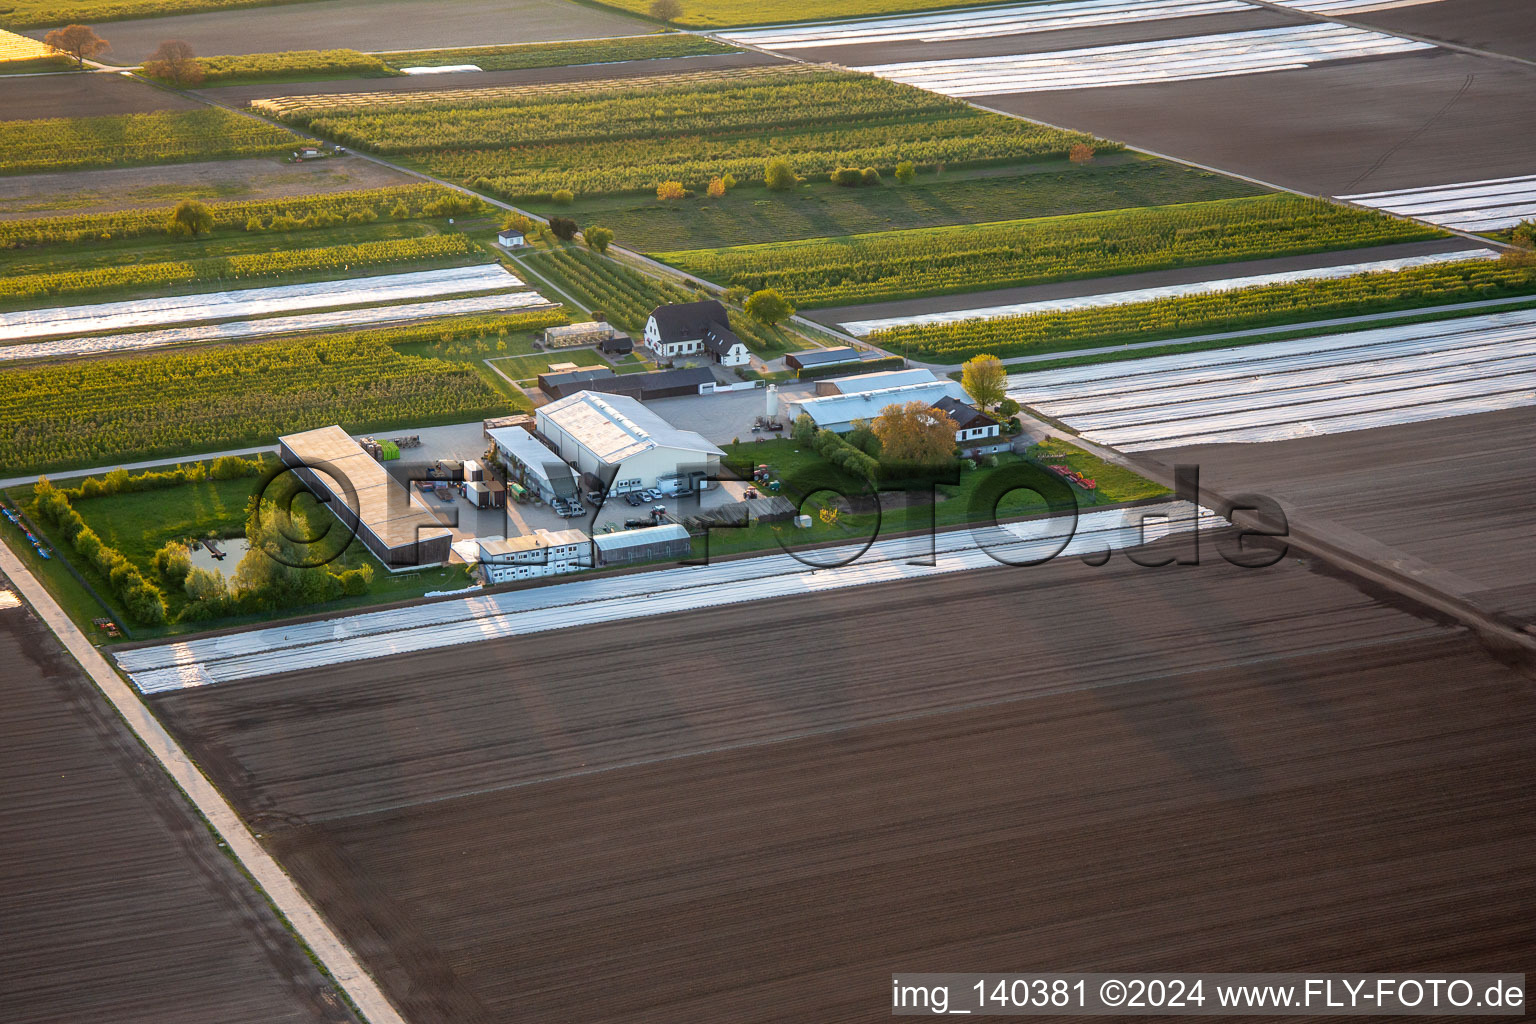 Aerial view of Farmer's garden in Winden in the state Rhineland-Palatinate, Germany